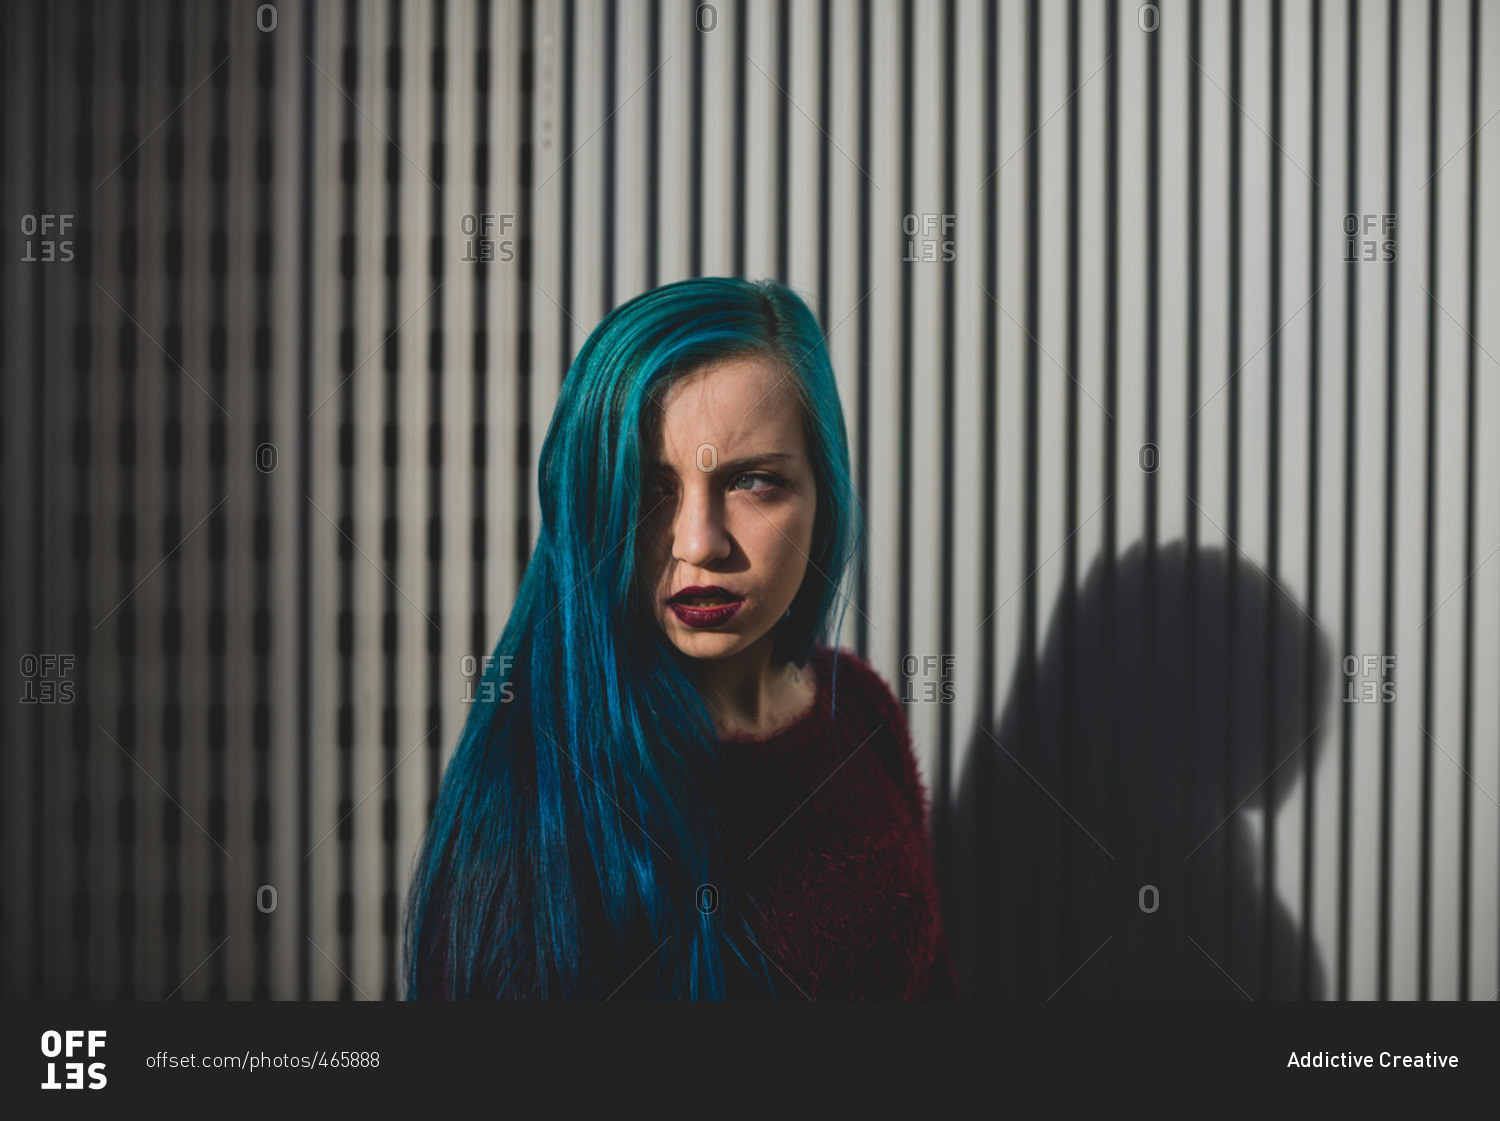 Punk girl with blue hair looking away against striped background